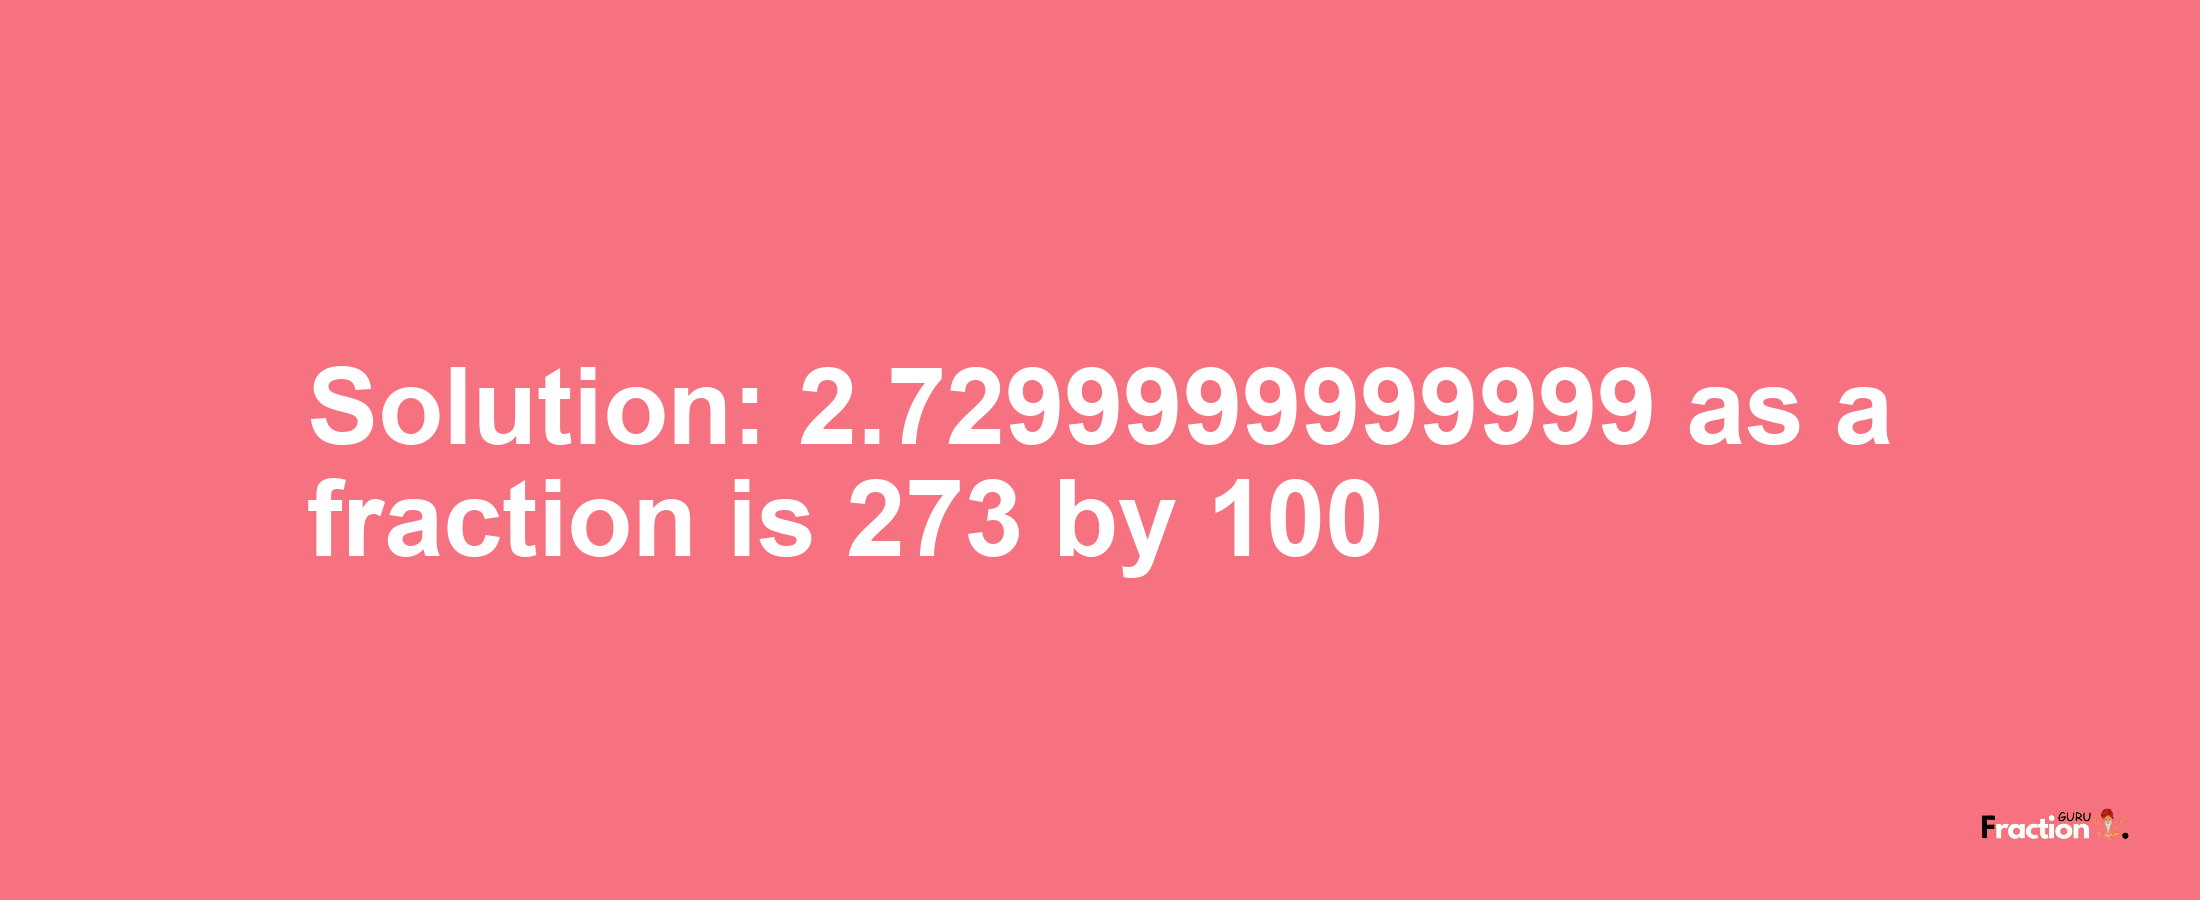 Solution:2.7299999999999 as a fraction is 273/100